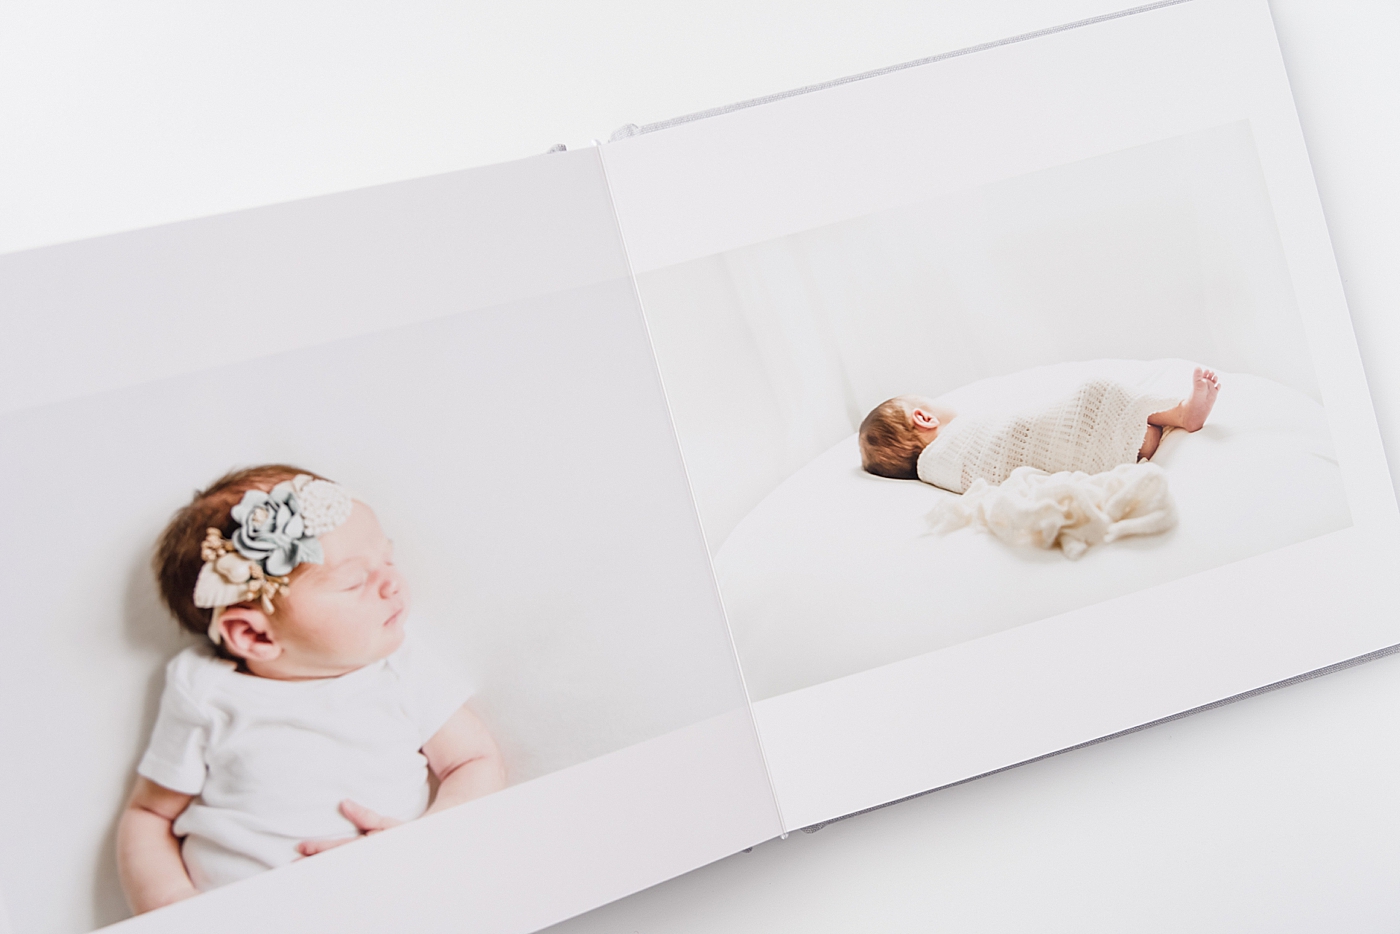 An album spread with a newborn baby girl | Photo by Anna Wisjo Photography